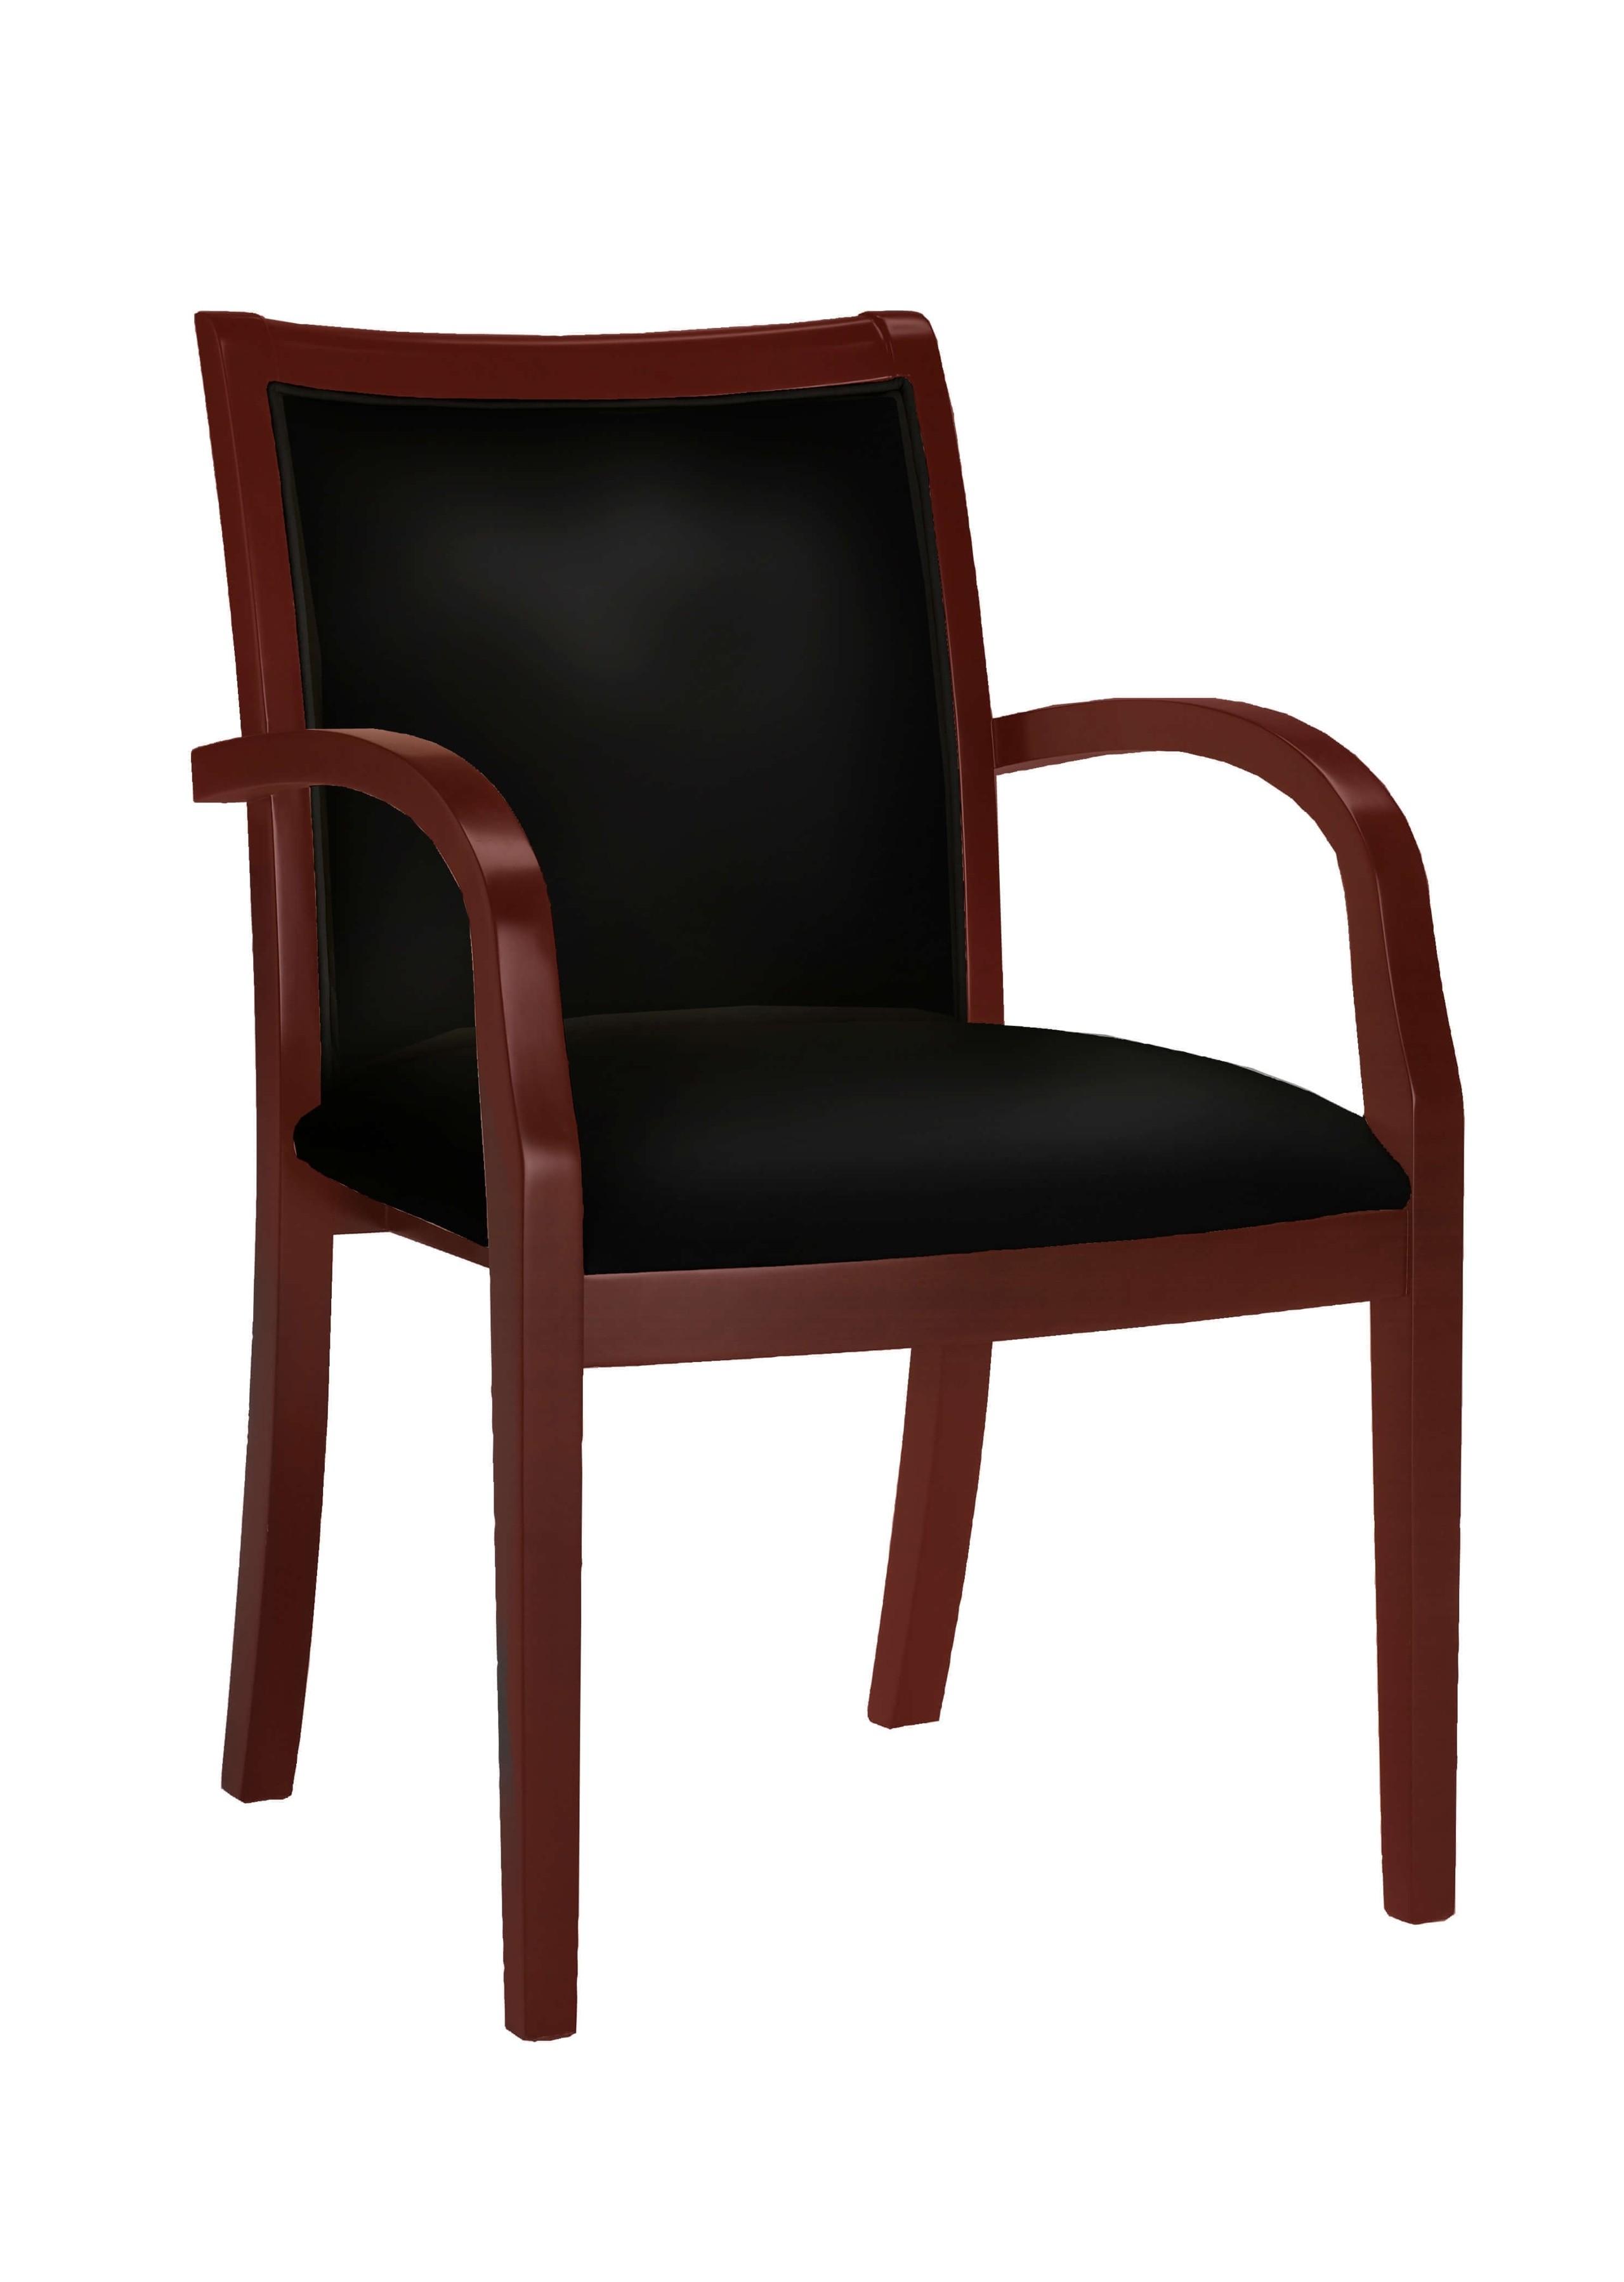 Pomeroy customer waiting chairs 2pack